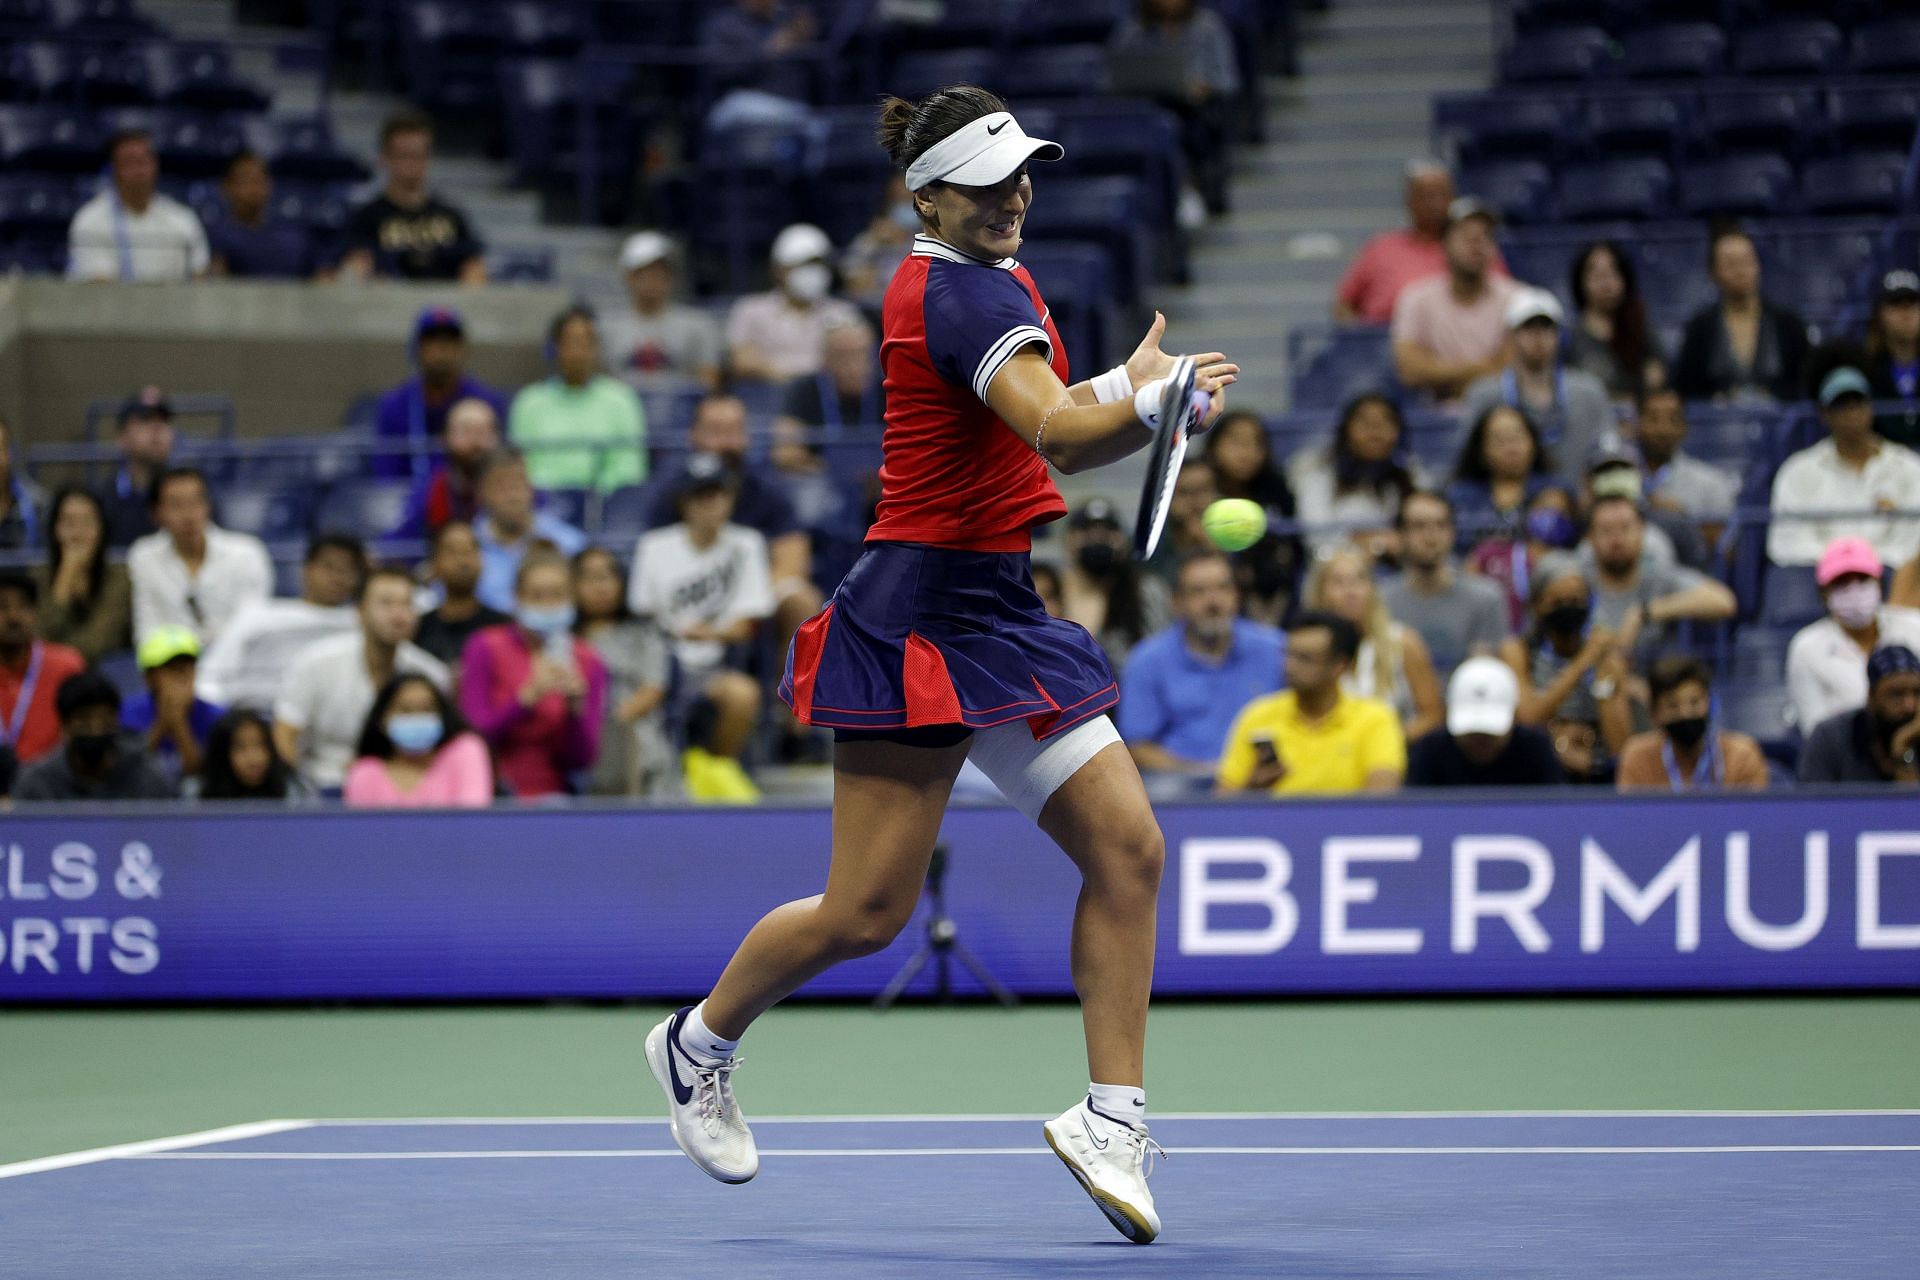 Bianca Andreescu at the US Open 2021